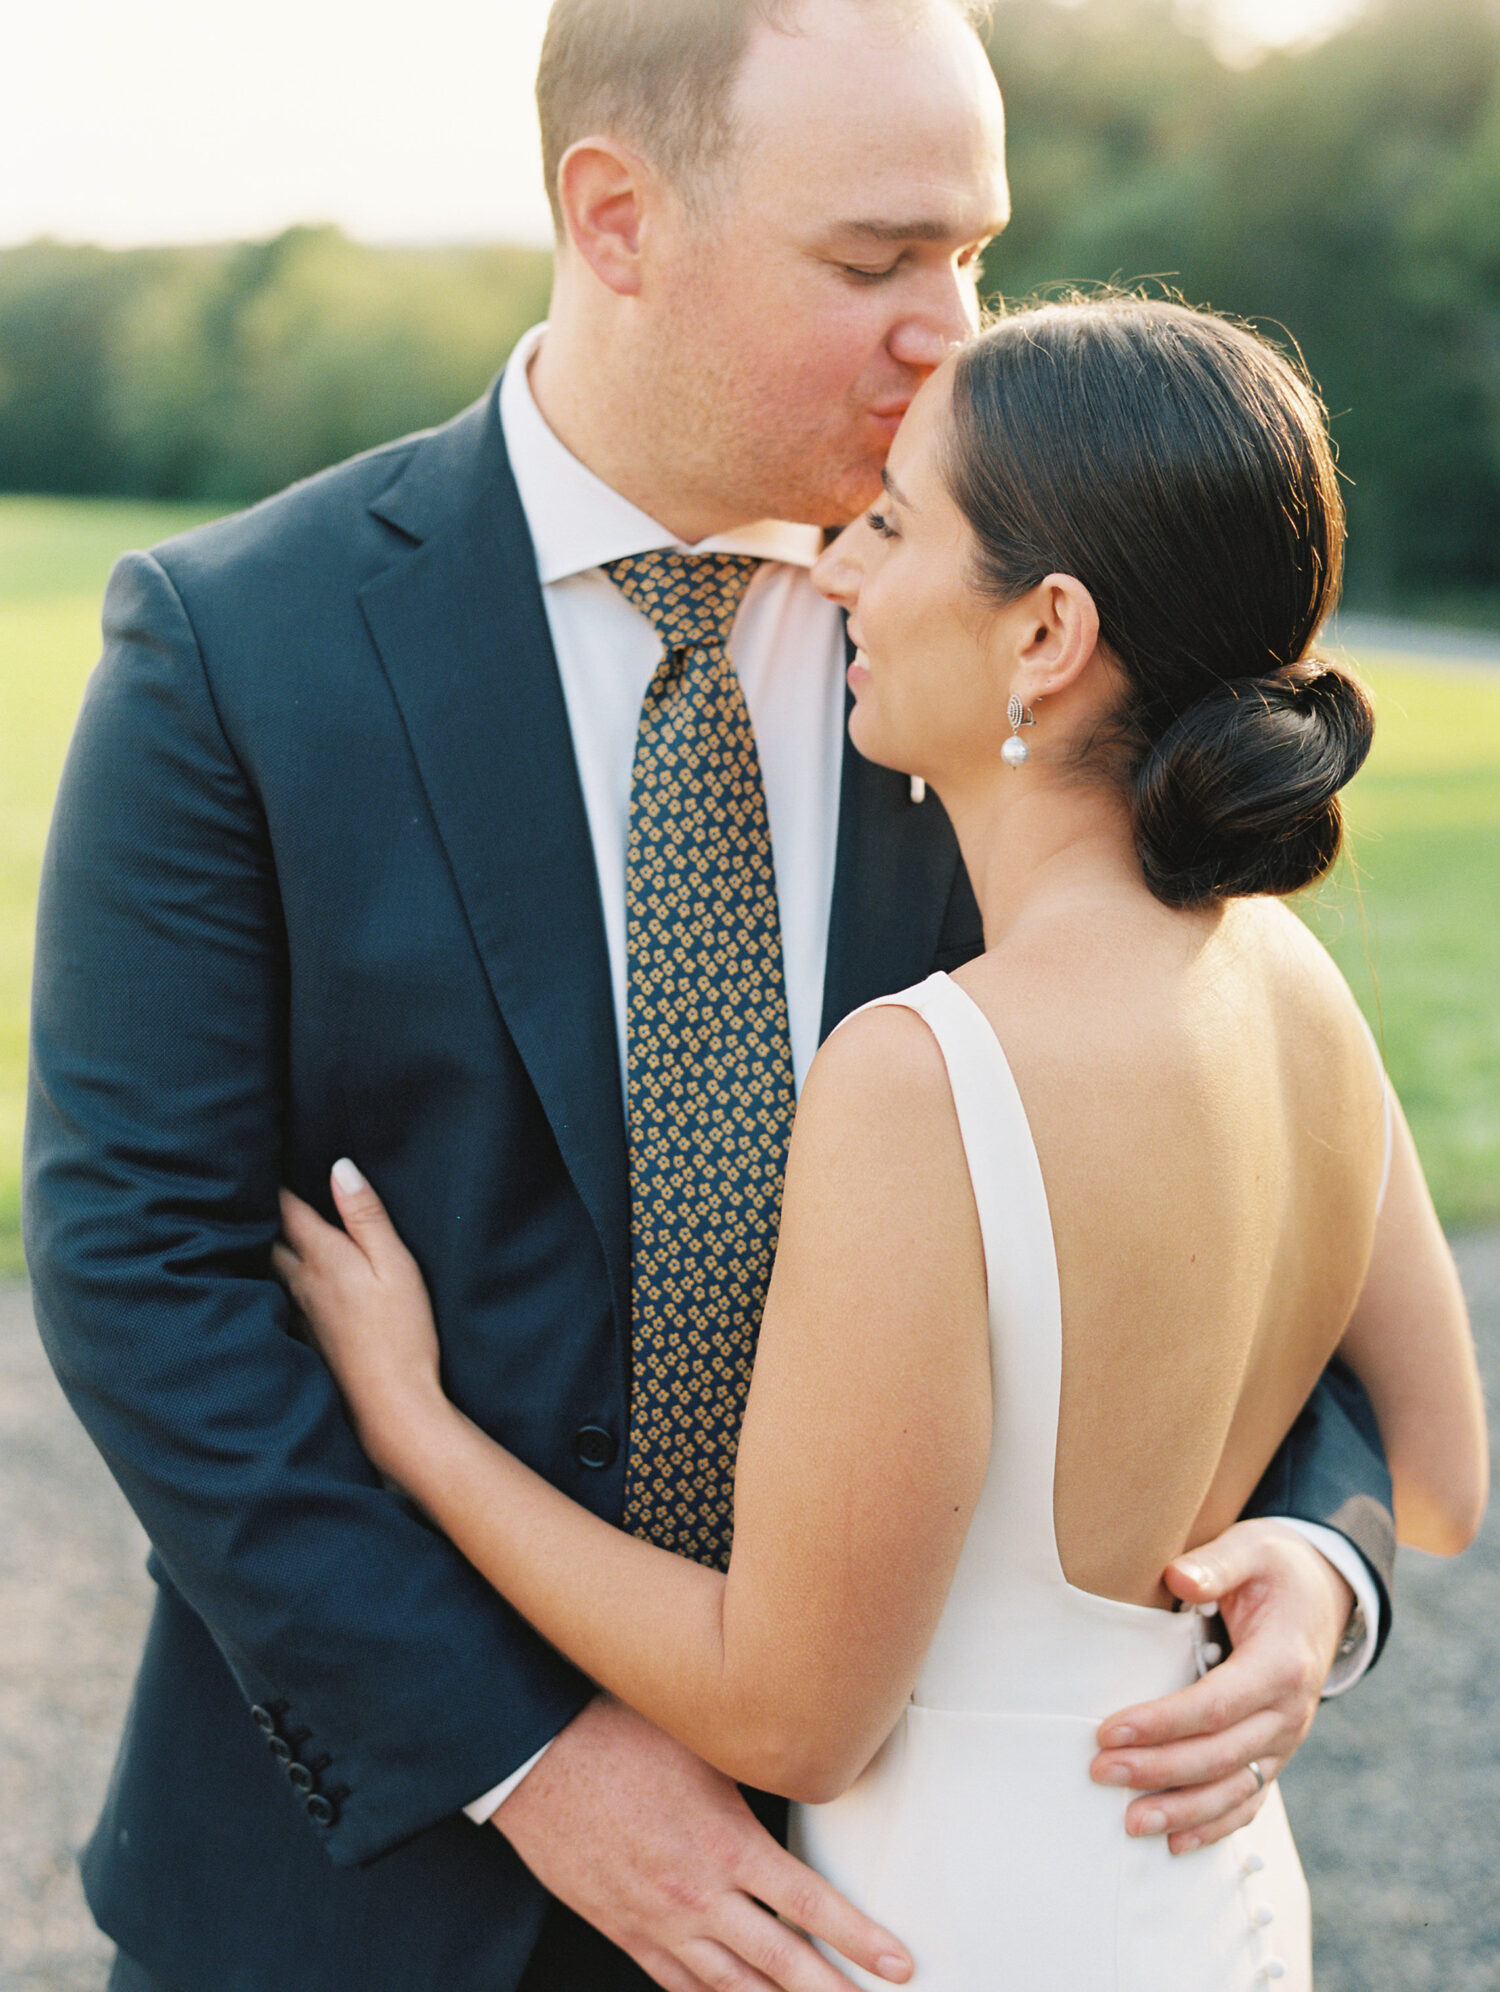 Modern Minimal Wedding day at Gather Greene photographed on film by Mary Dougherty